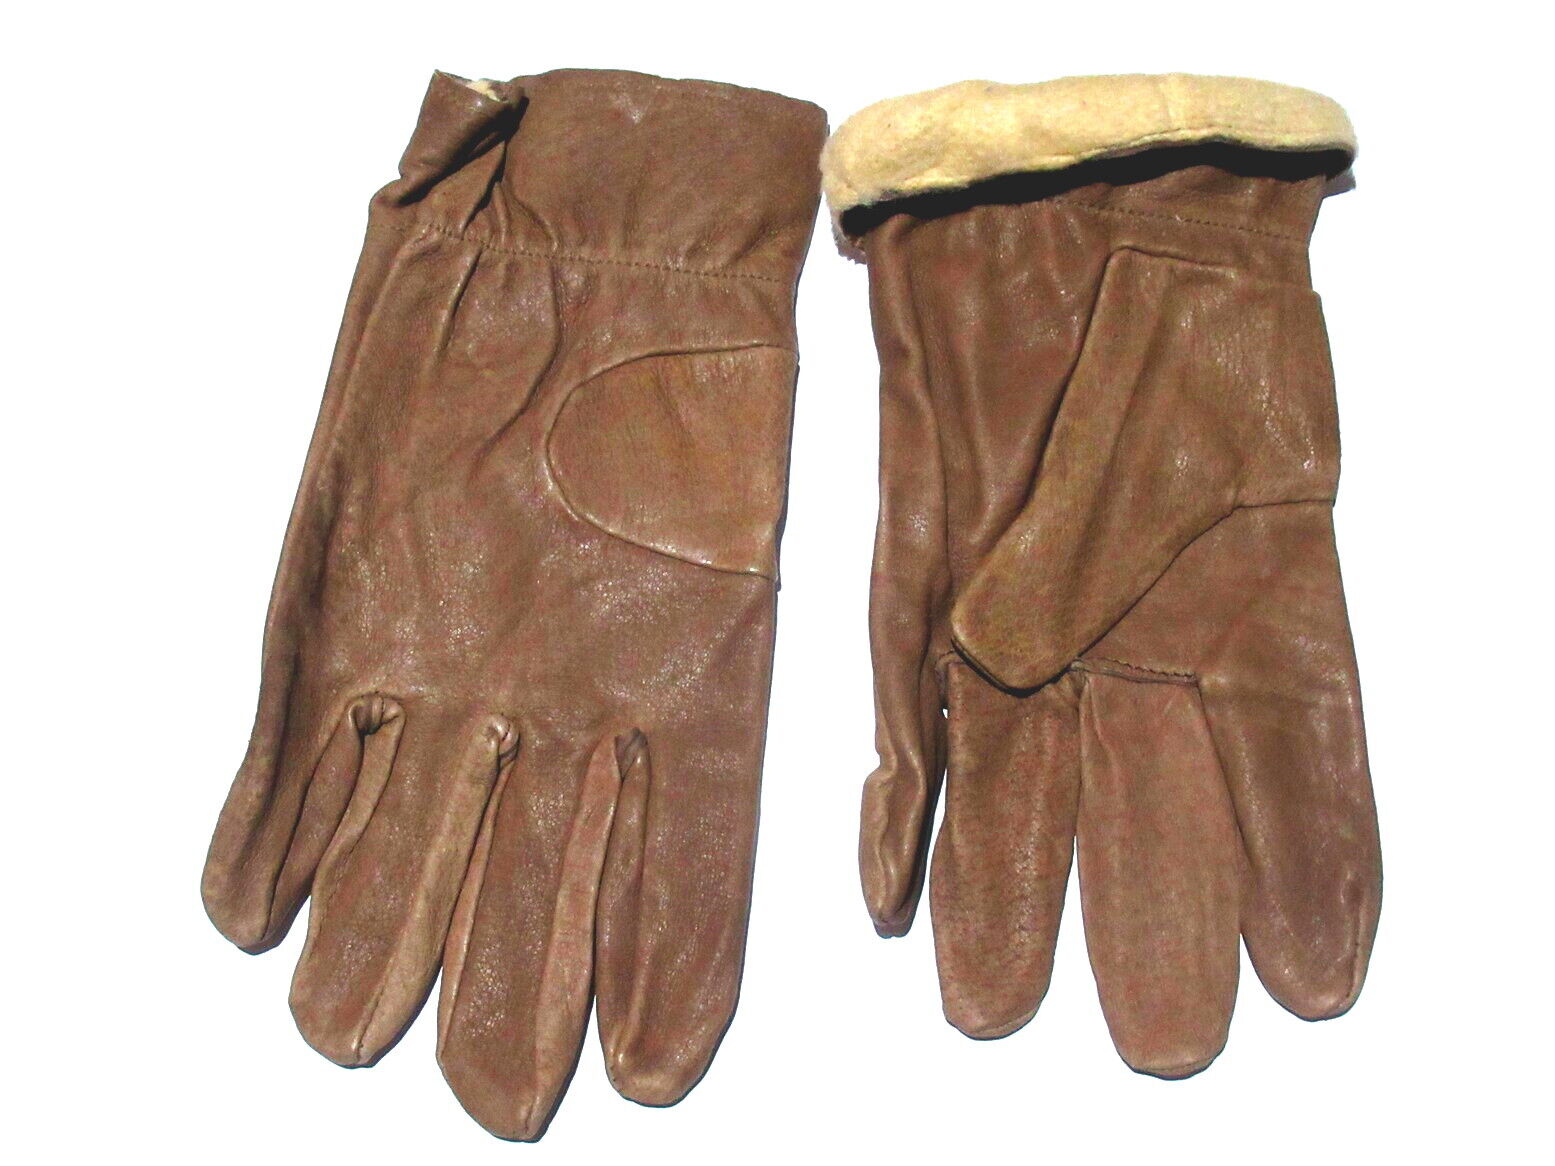 Vintage 1990s Czech Army deerskin brown leather gloves military mittens lined